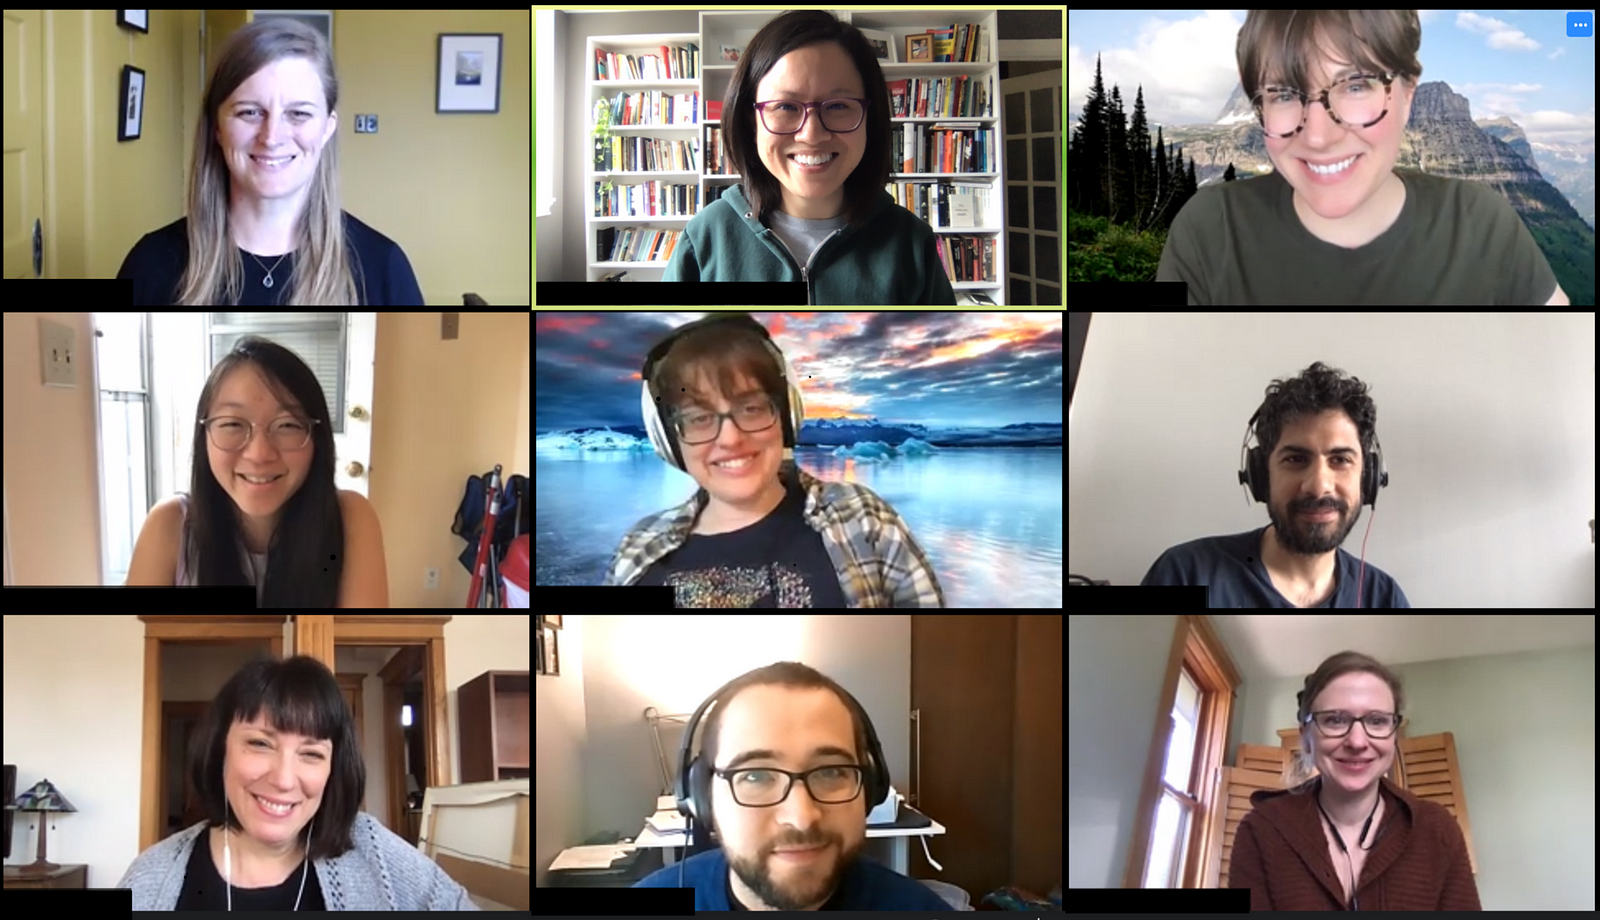 9 people in a grid on a video conference call